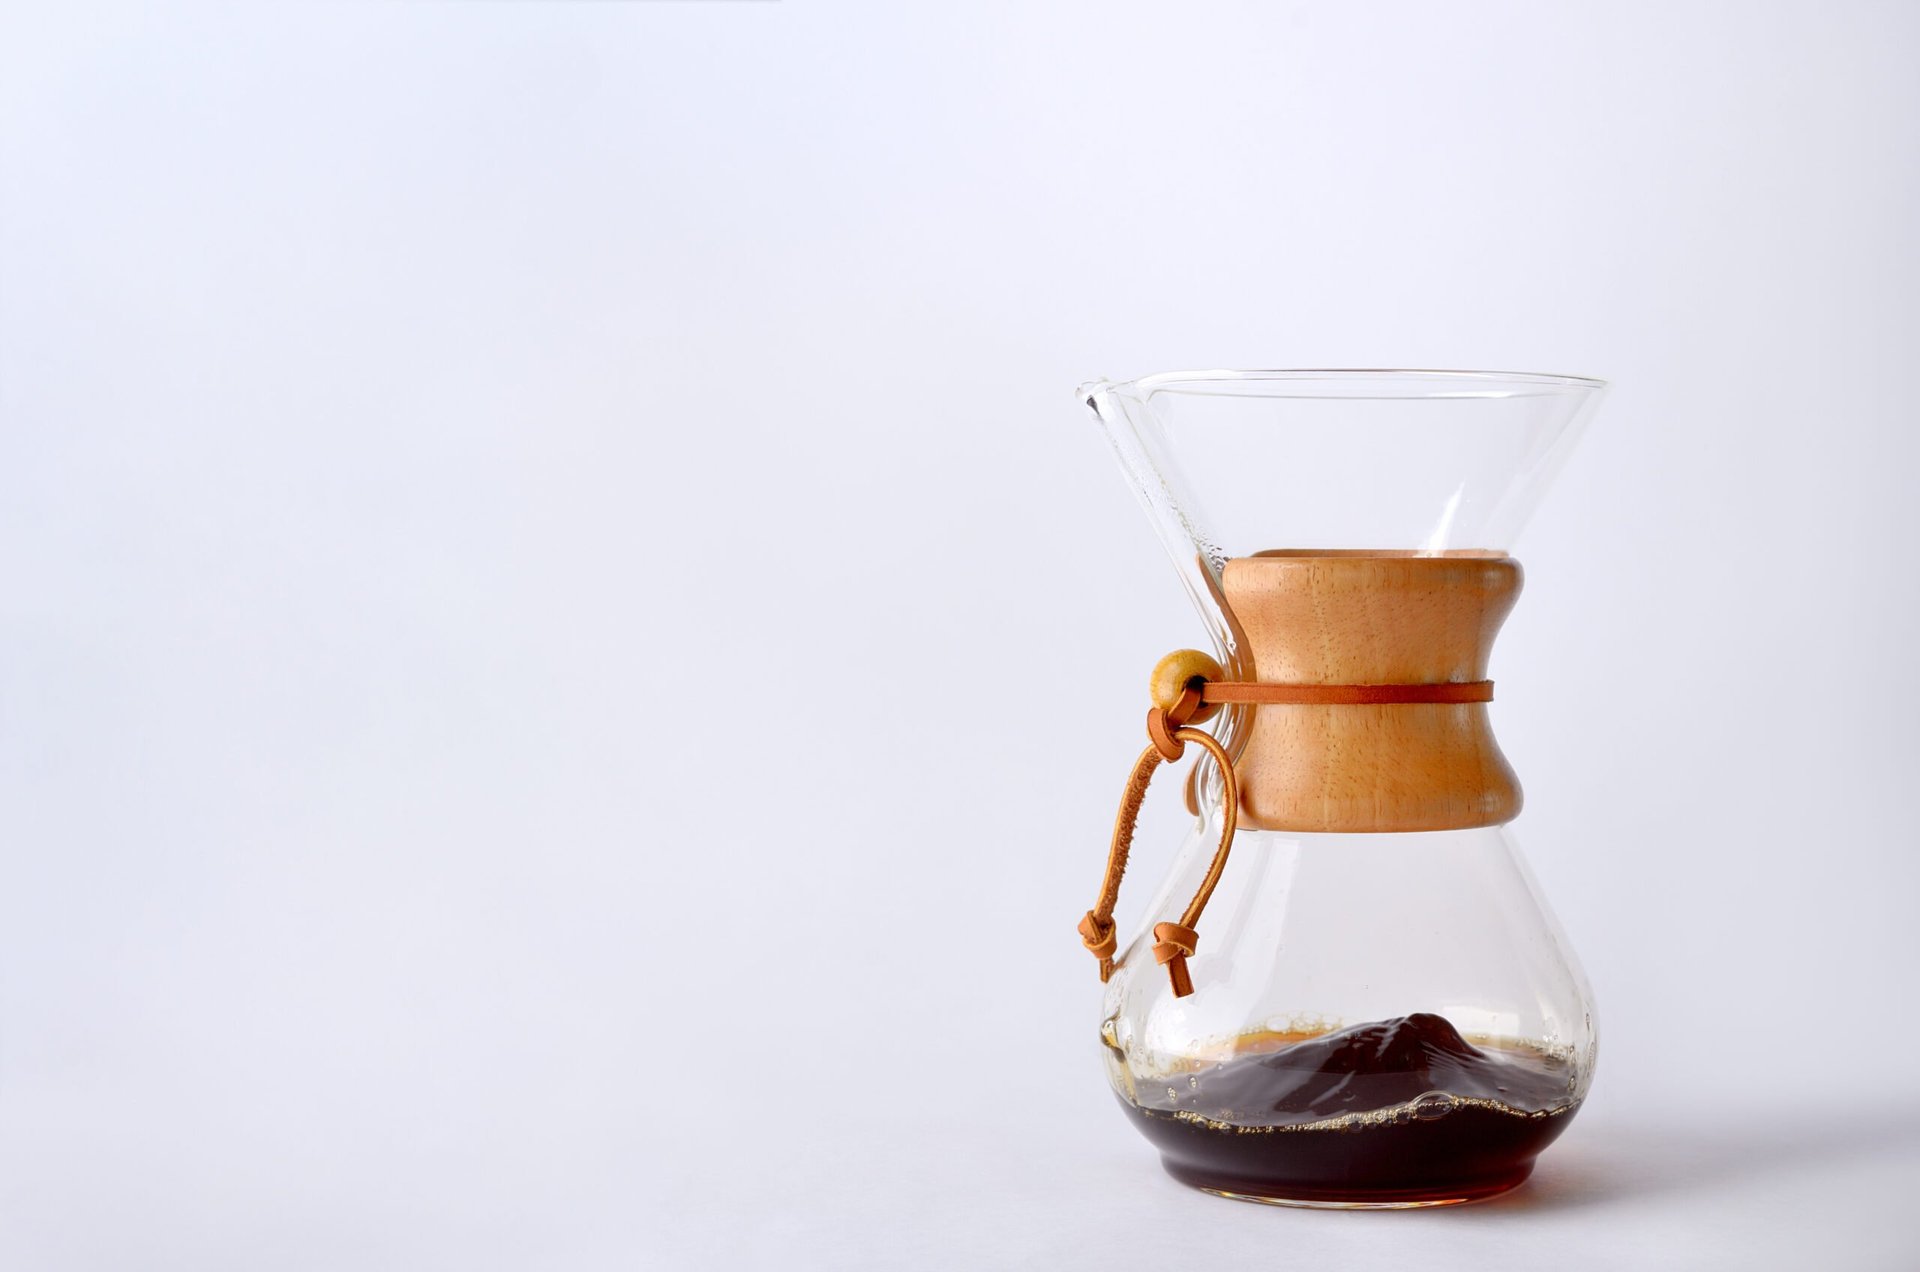 Chemex pour-over coffee maker